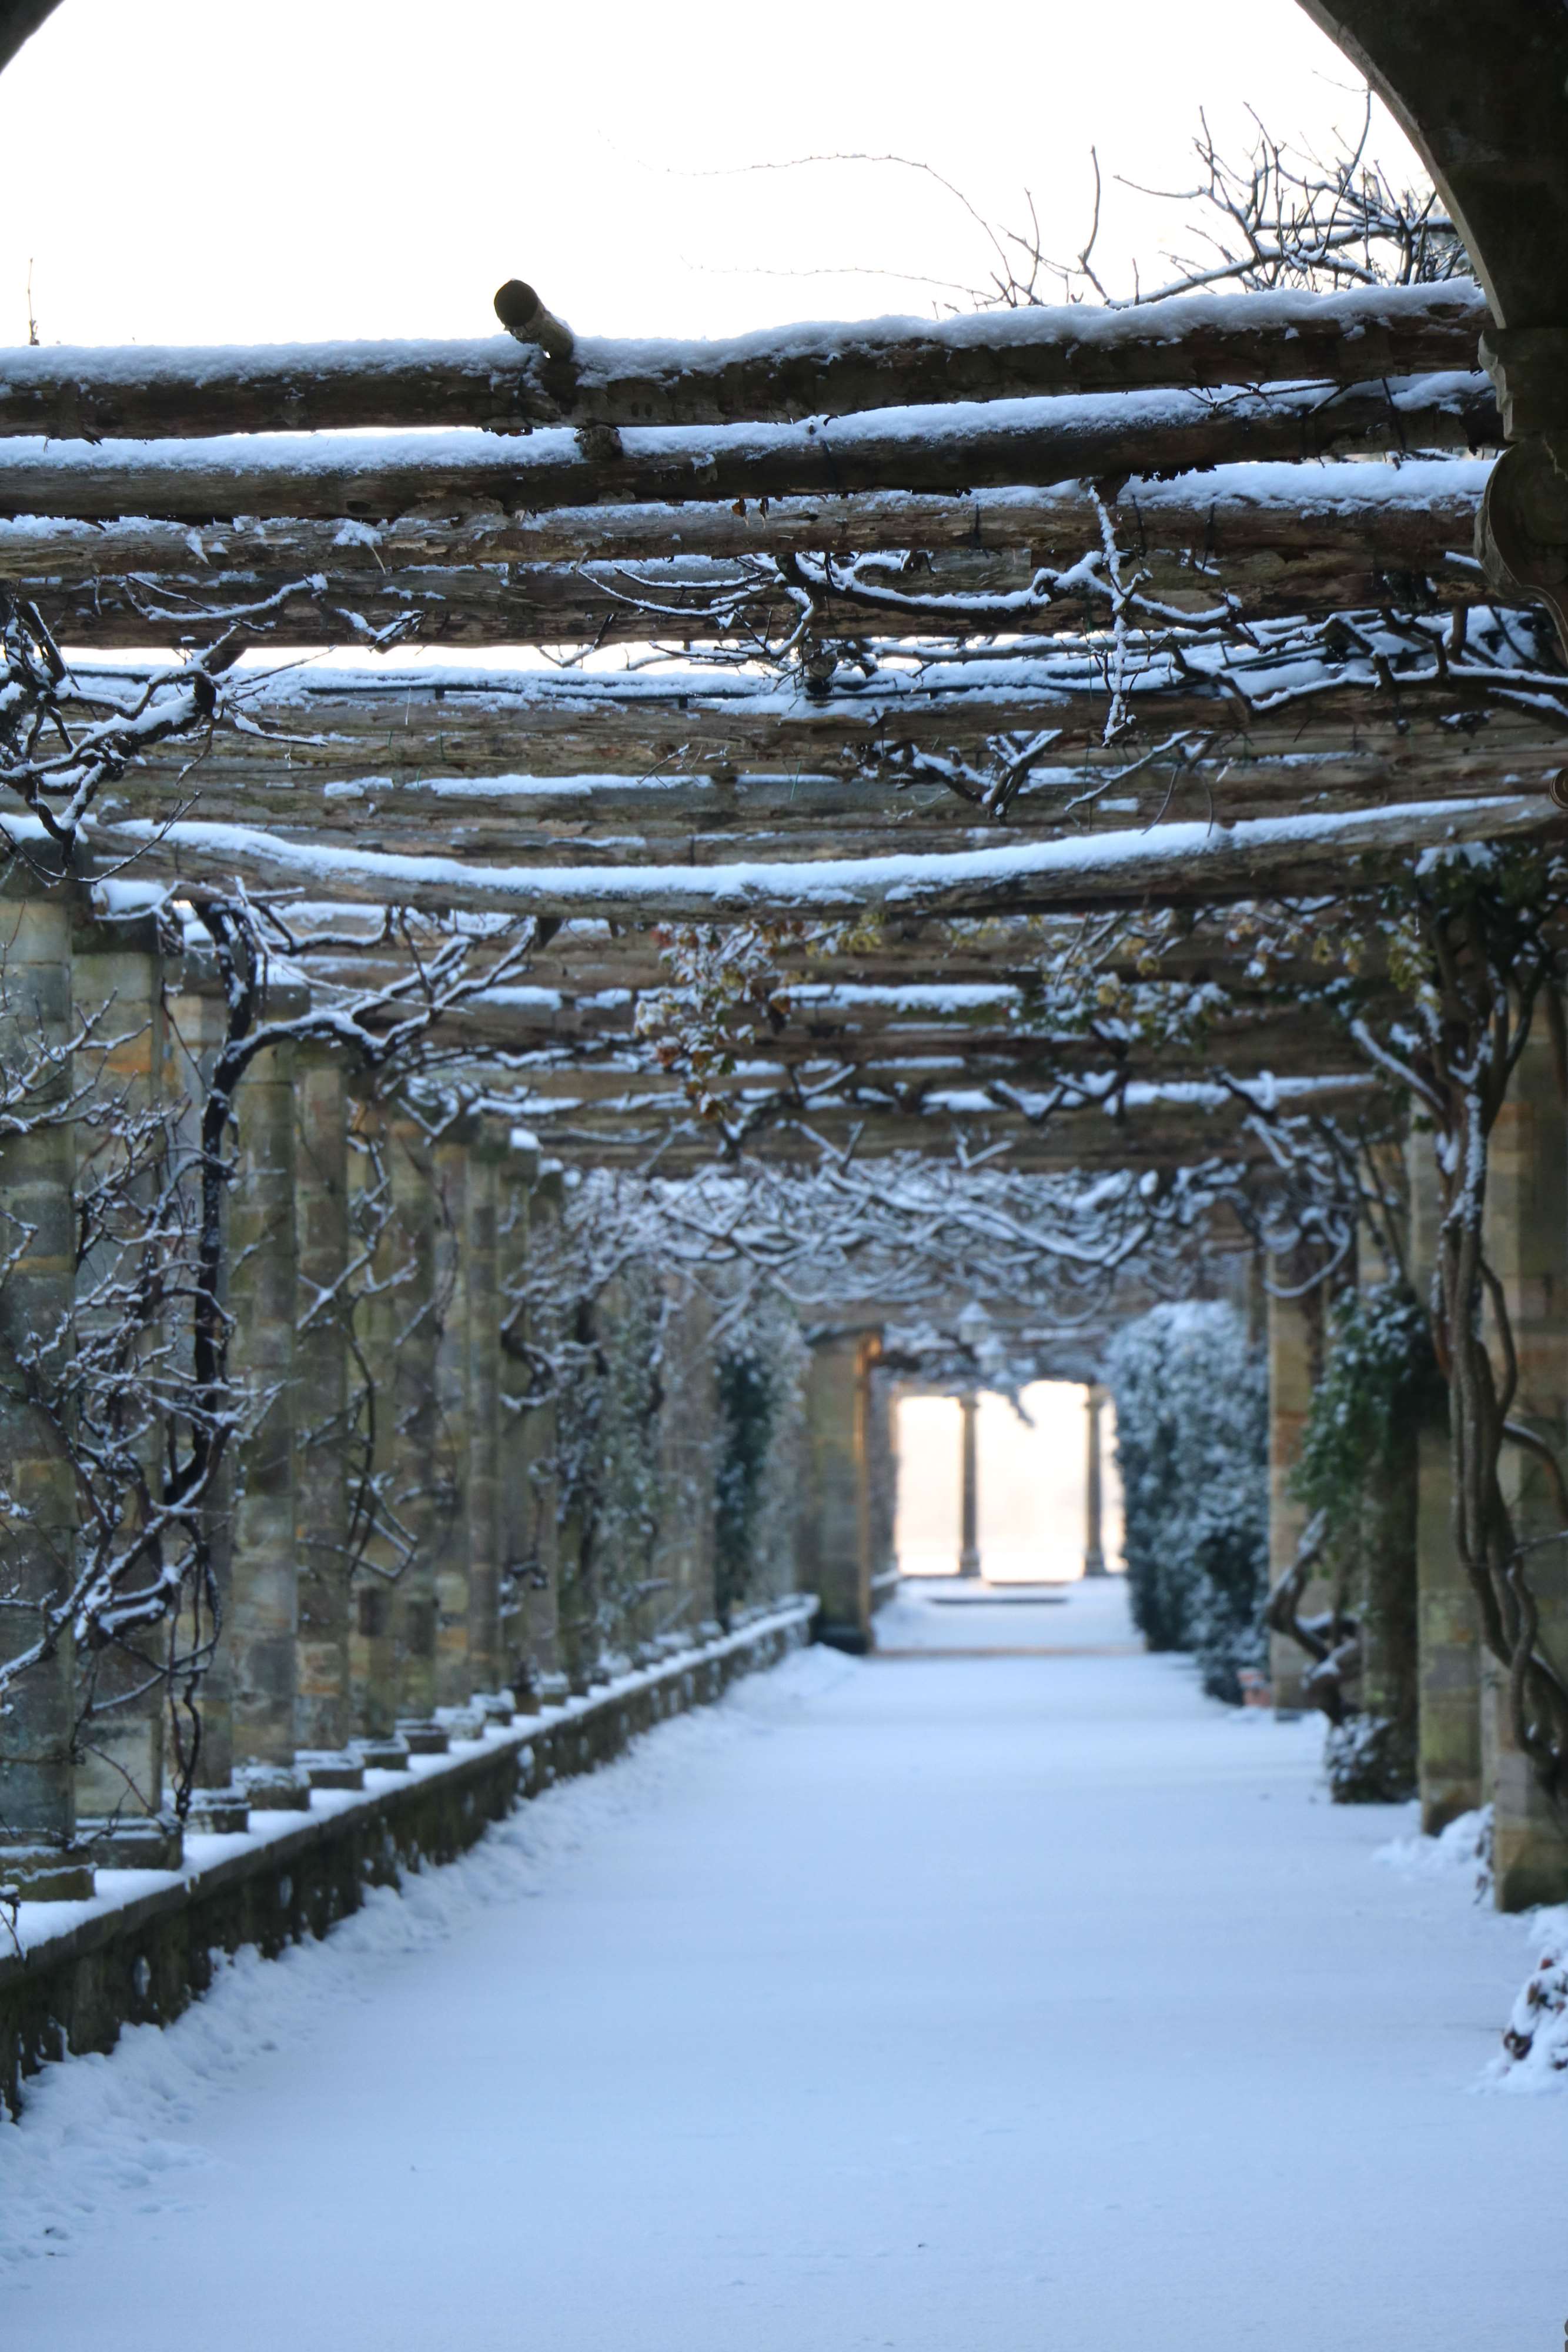 Find time to explore the gardens at Hever, whatever the weather